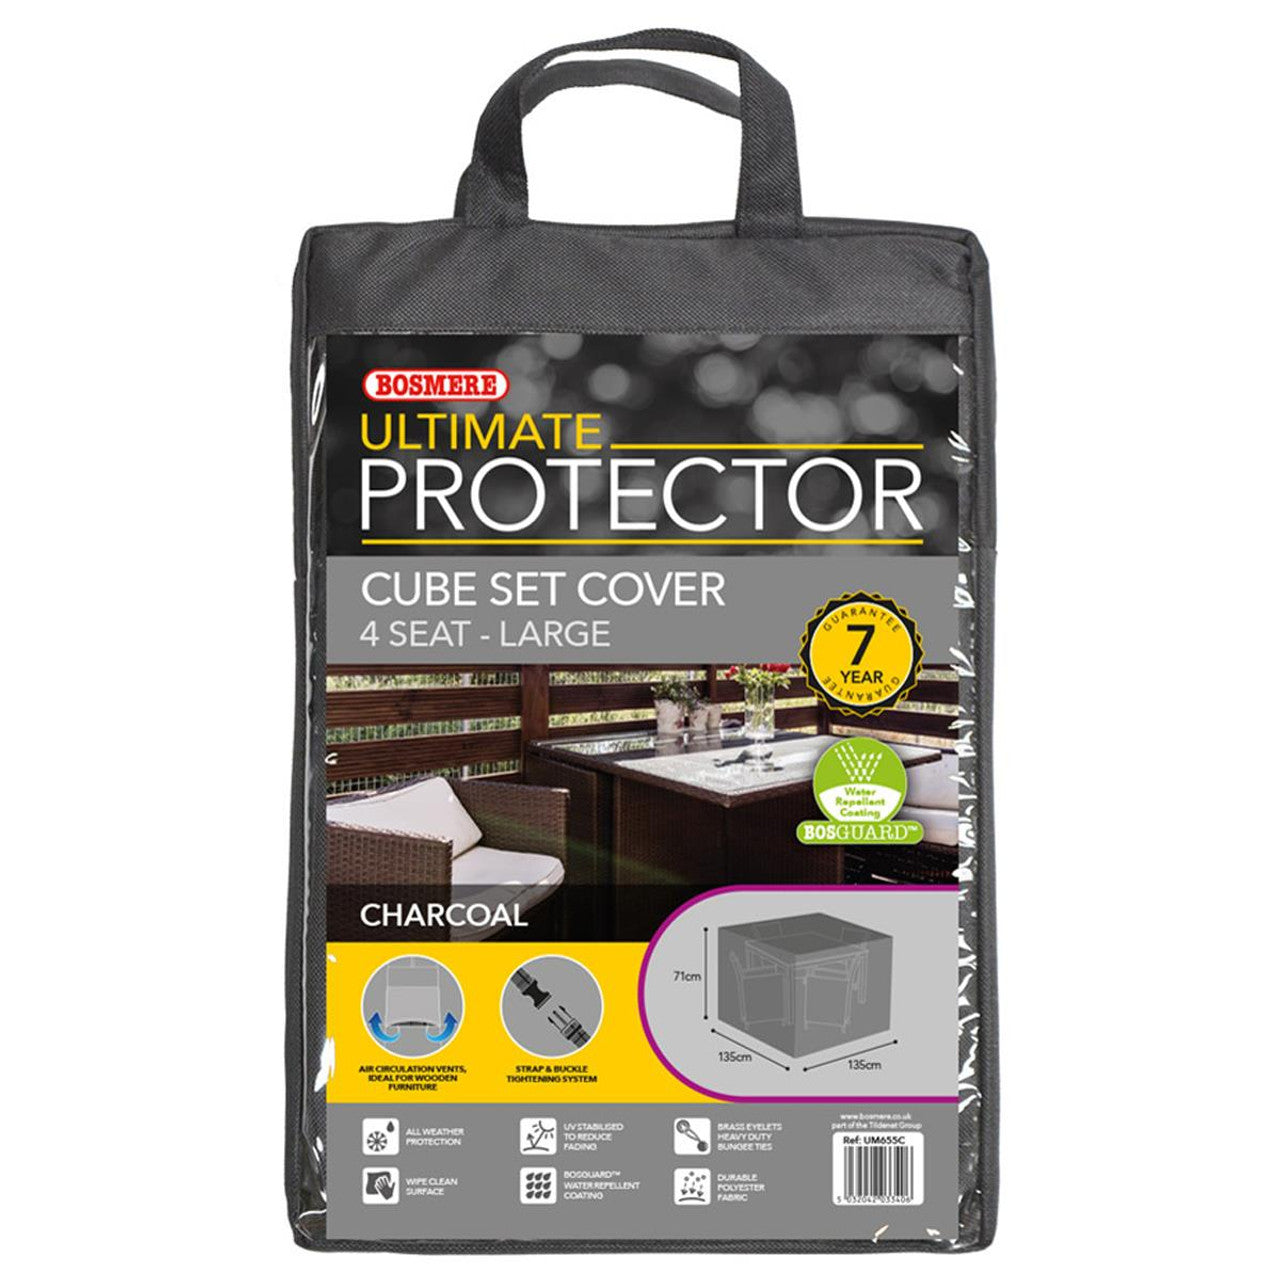 Bosmere Ultimate Protector Outdoor Furniture Cover for 4 Seat Large Cube Set